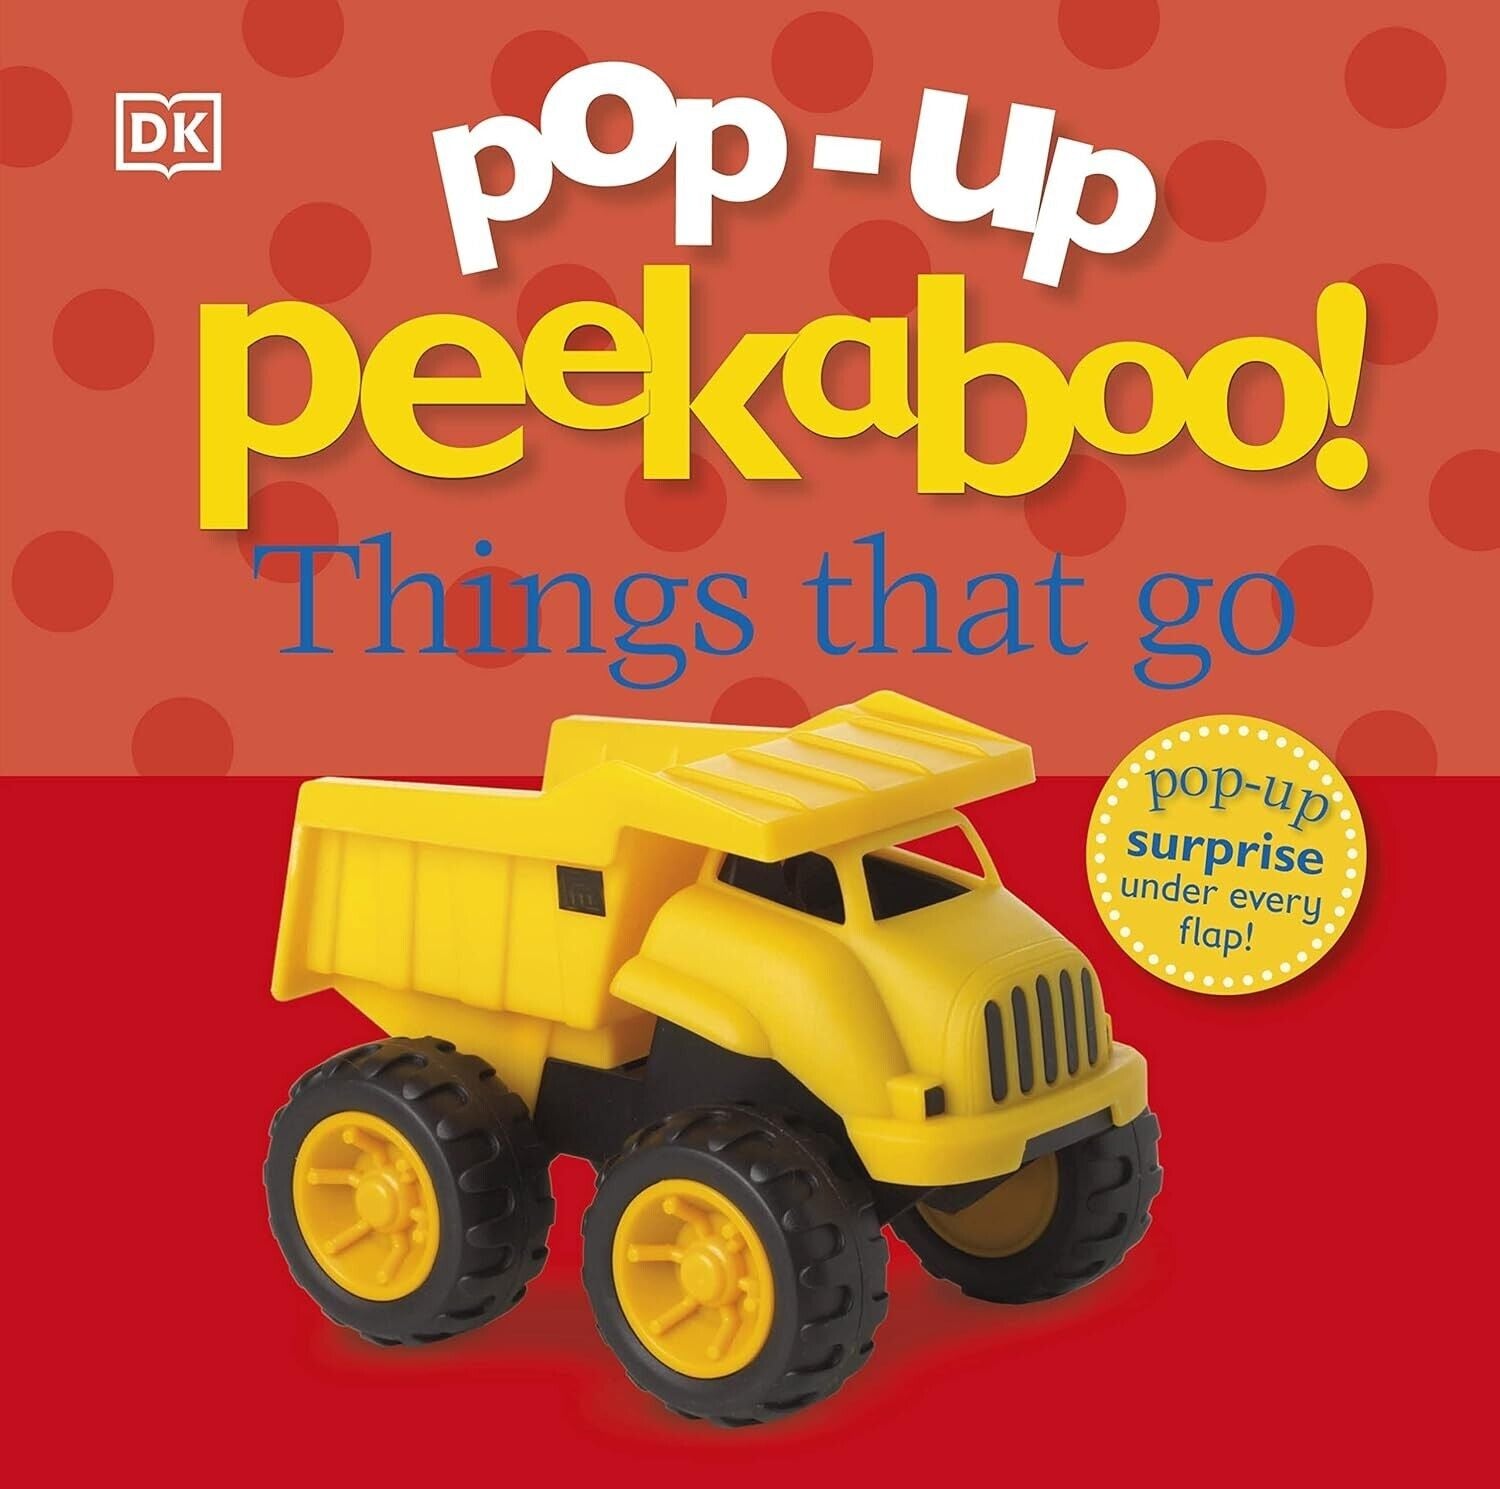 Pop-Up Peekaboo! Things That Go by DK 9781409383024 Board book NEW - Lets Buy Books